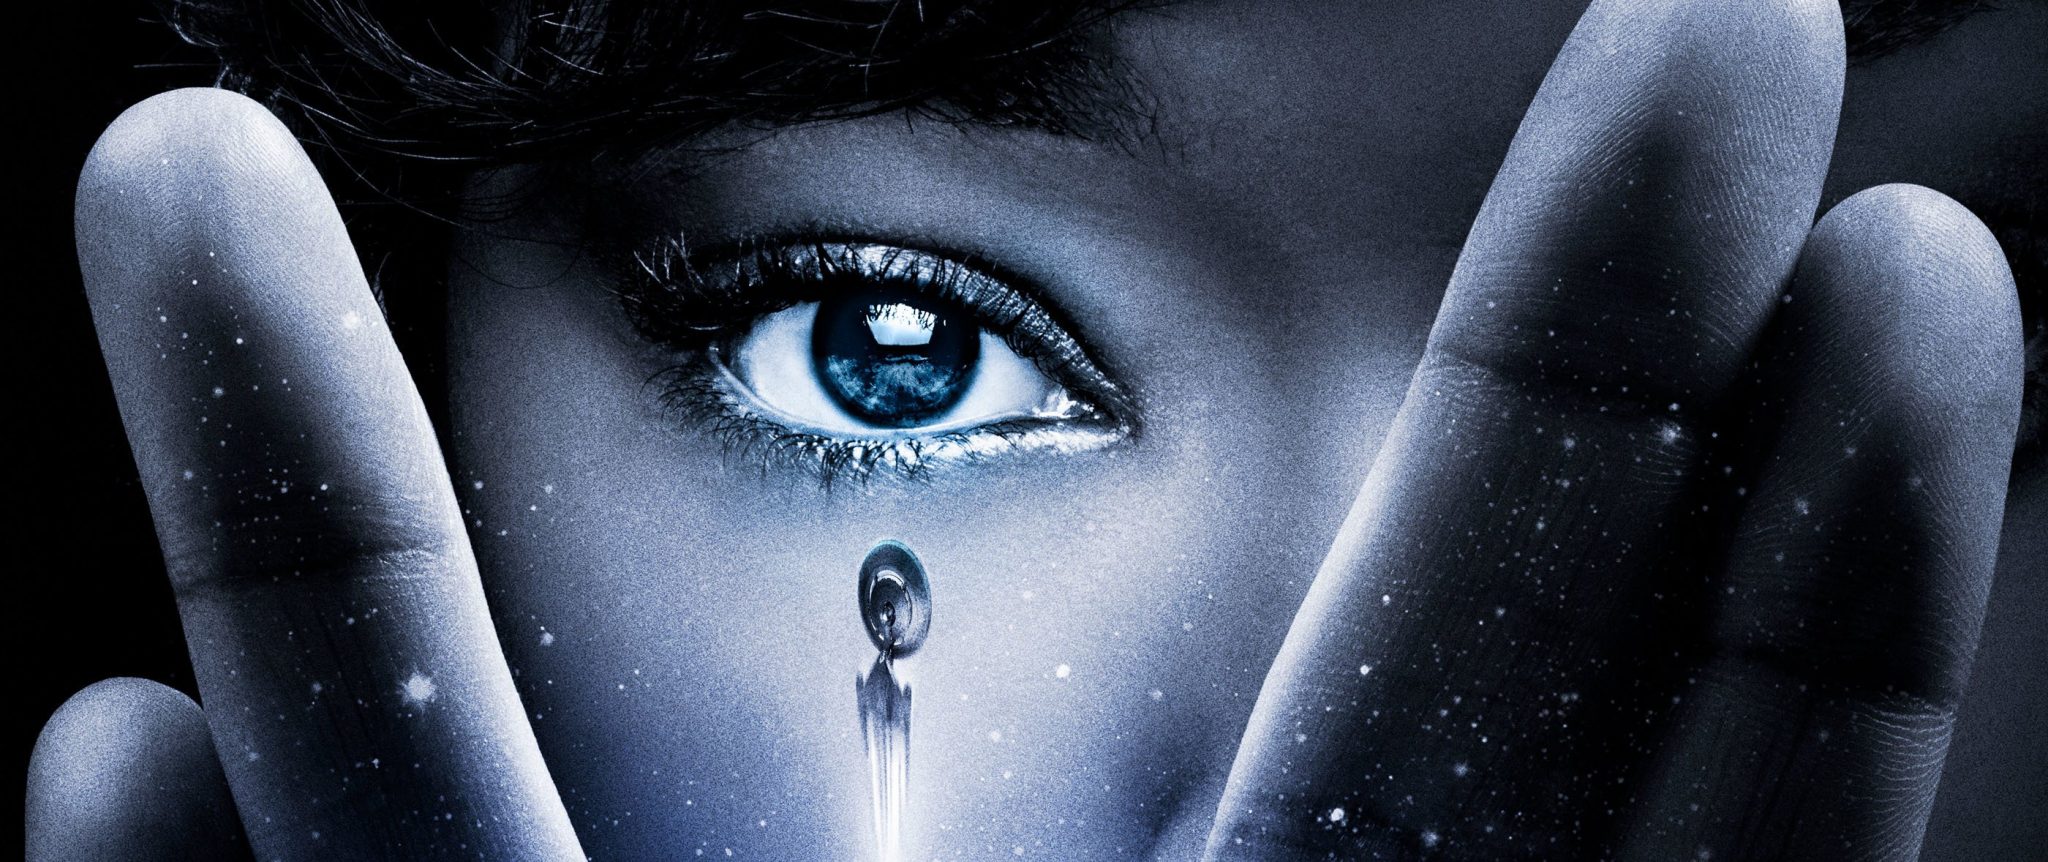 New Trailer and Photos Released for Star Trek: Discovery By CBS